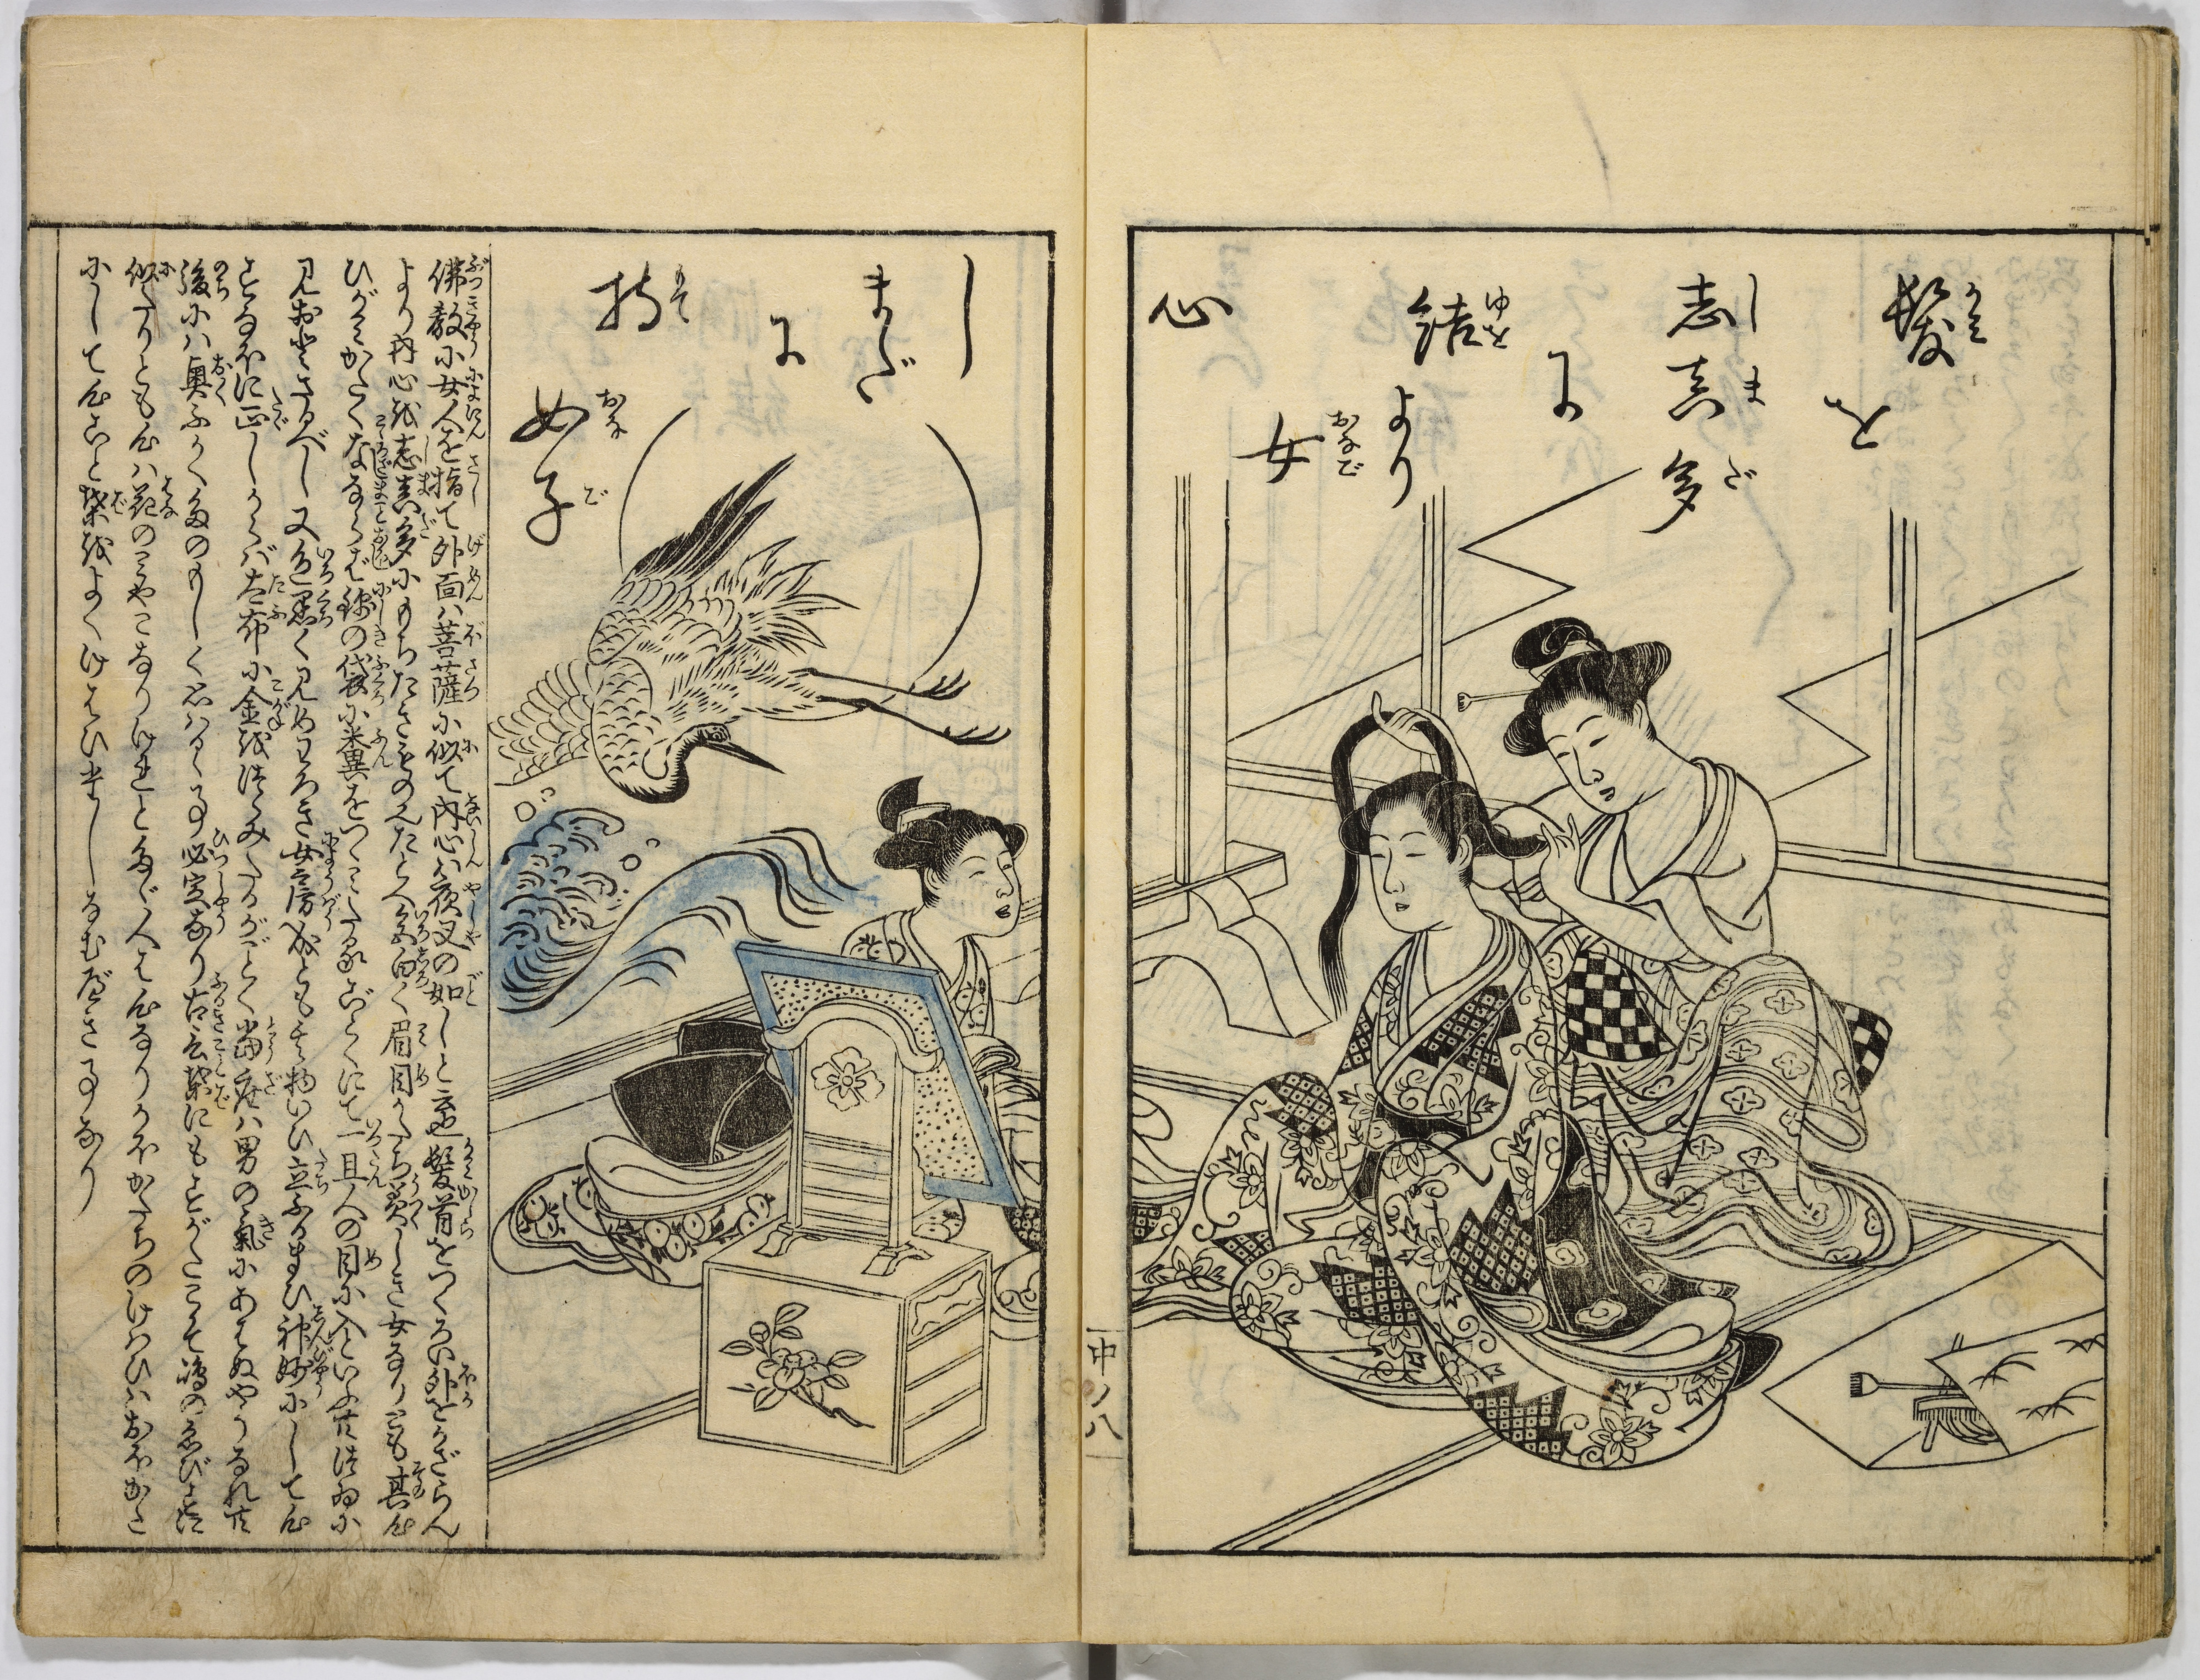 Ōyō Sketchbook (Ōyō manga) : [volume 2] - Japanese Illustrated Books -  Digital Collections from The Metropolitan Museum of Art Libraries